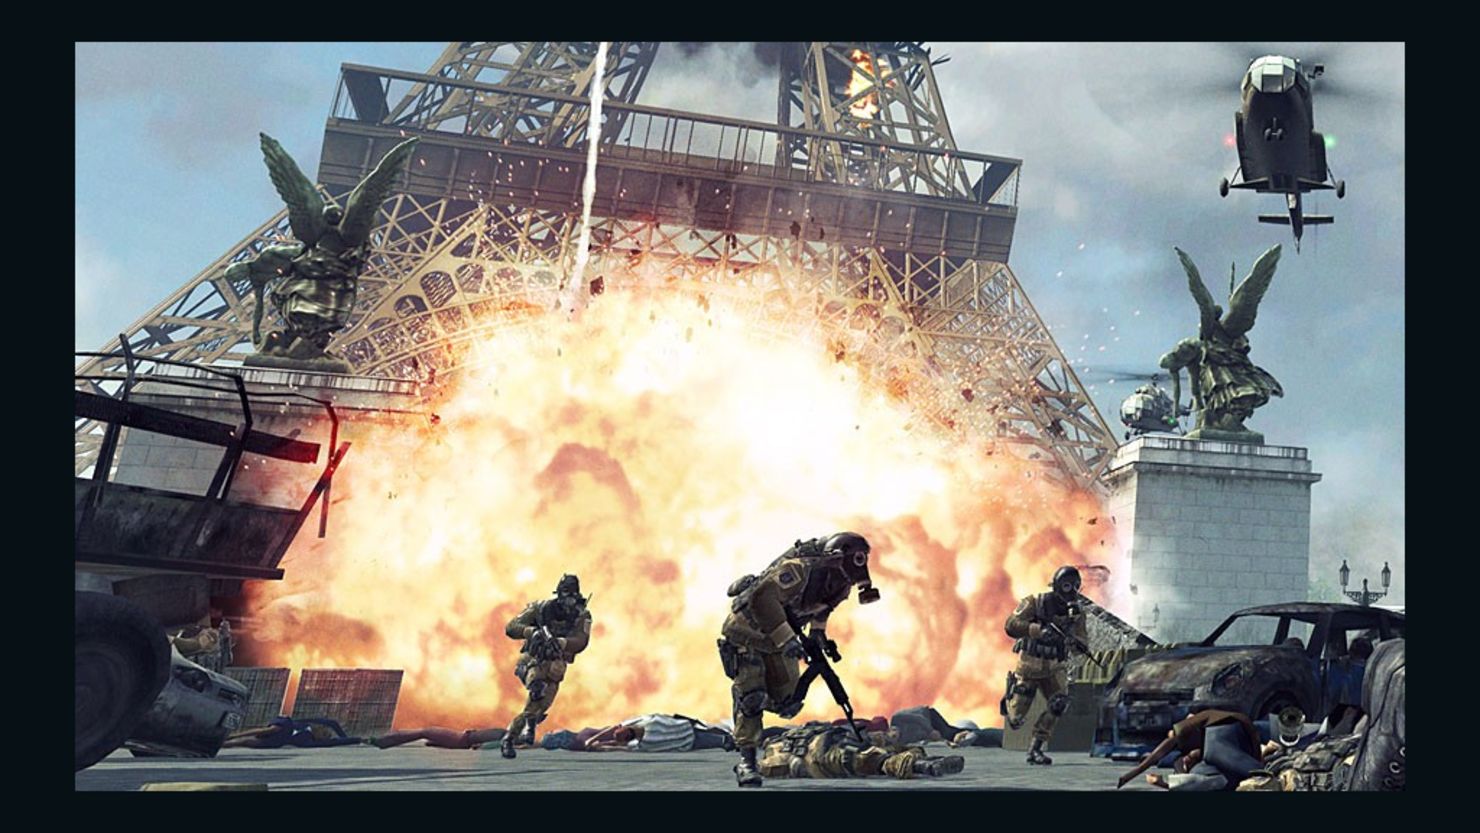 "Call of Duty: Modern Warfare 3" places gamers in a near-futuristic global war across multiple fronts, including Paris.